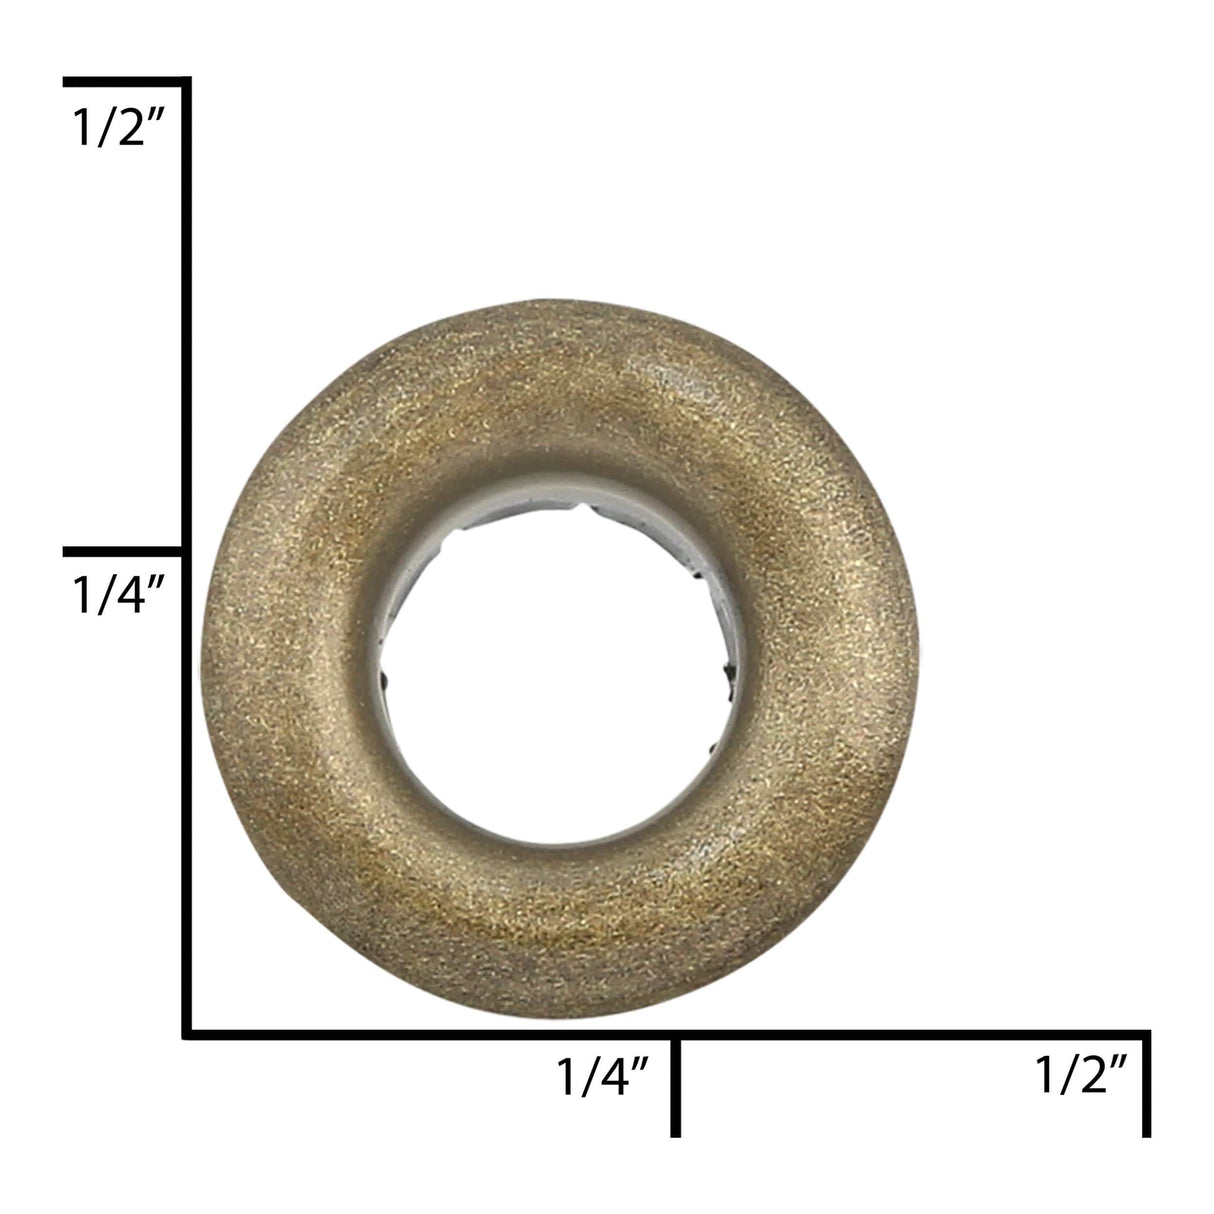 Ohio Travel Bag Fasteners 7/32" Antique Brass, Eyelet, Solid Brass - 12 pk, #A-348-ANTB A-348-ANTB